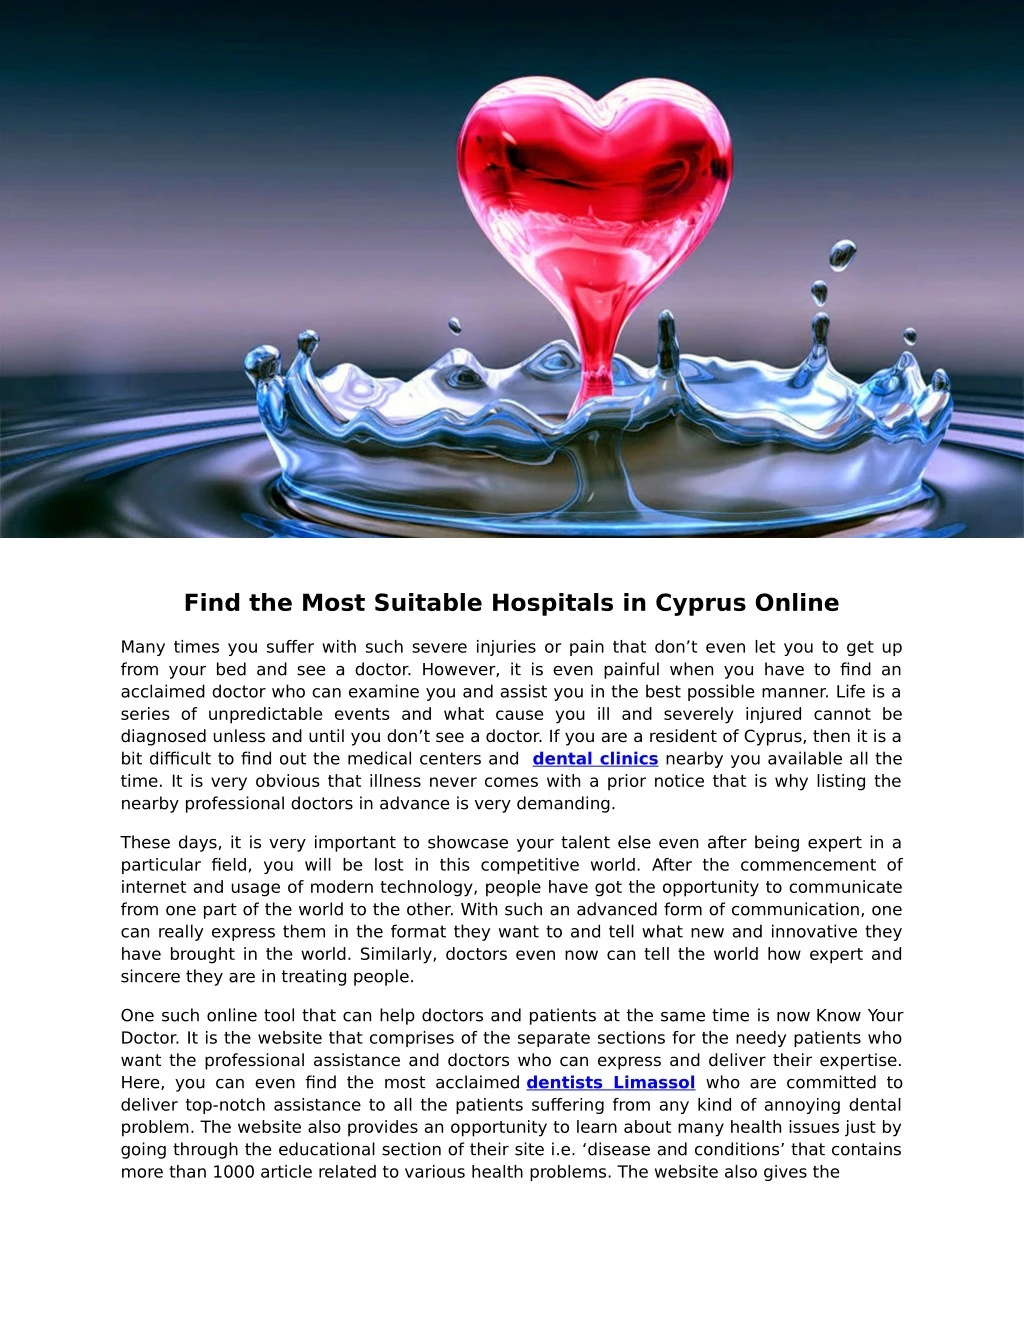 find the most suitable hospitals in cyprus online